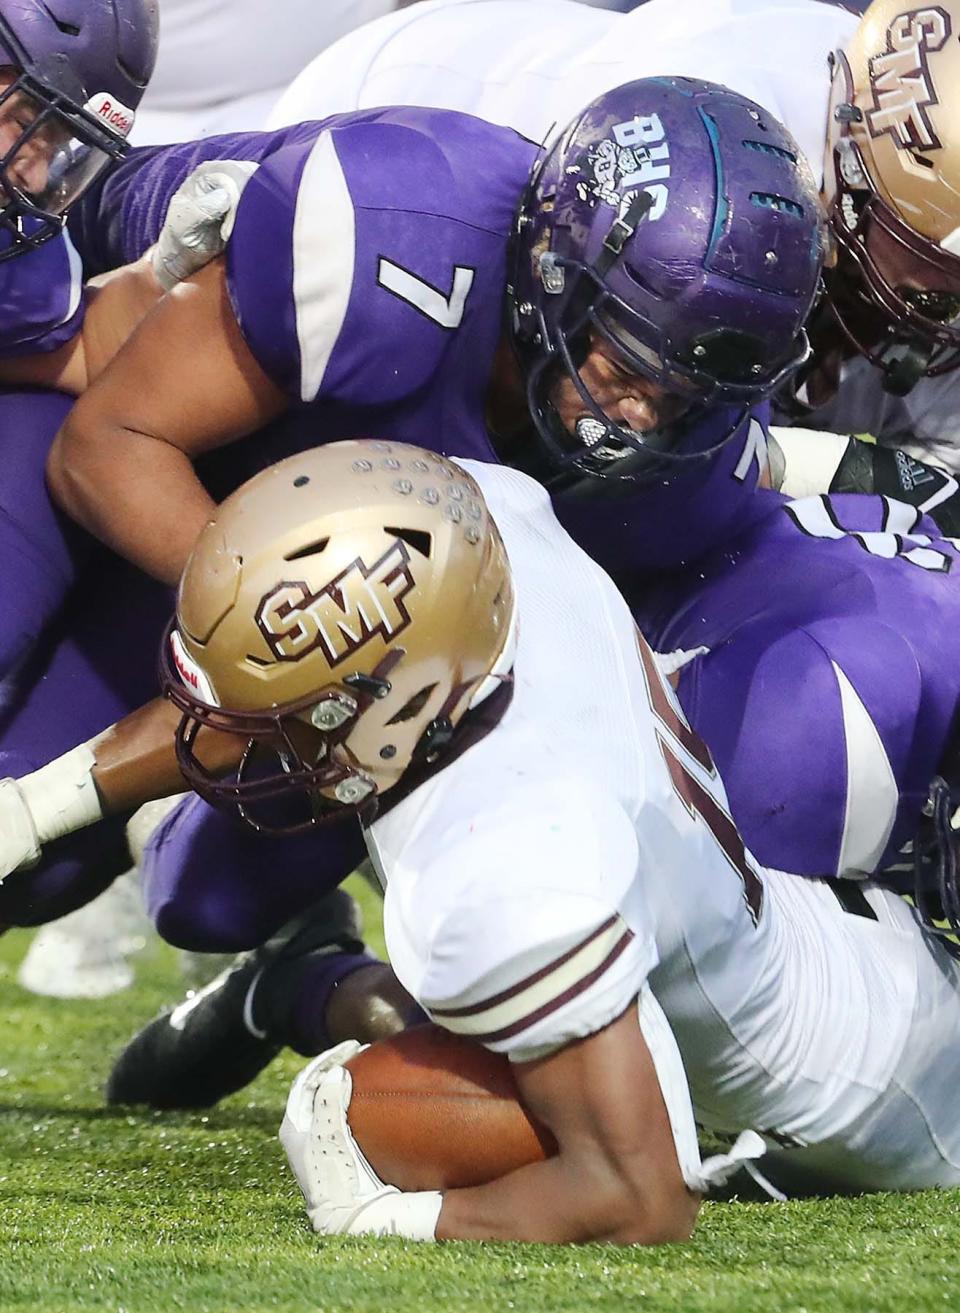 Barberton's John Jackson, top, tackles Stow's Xavier Preston during the first half of their game at Barberton High School Friday, Aug. 27, 2021 in Barberton, Ohio.